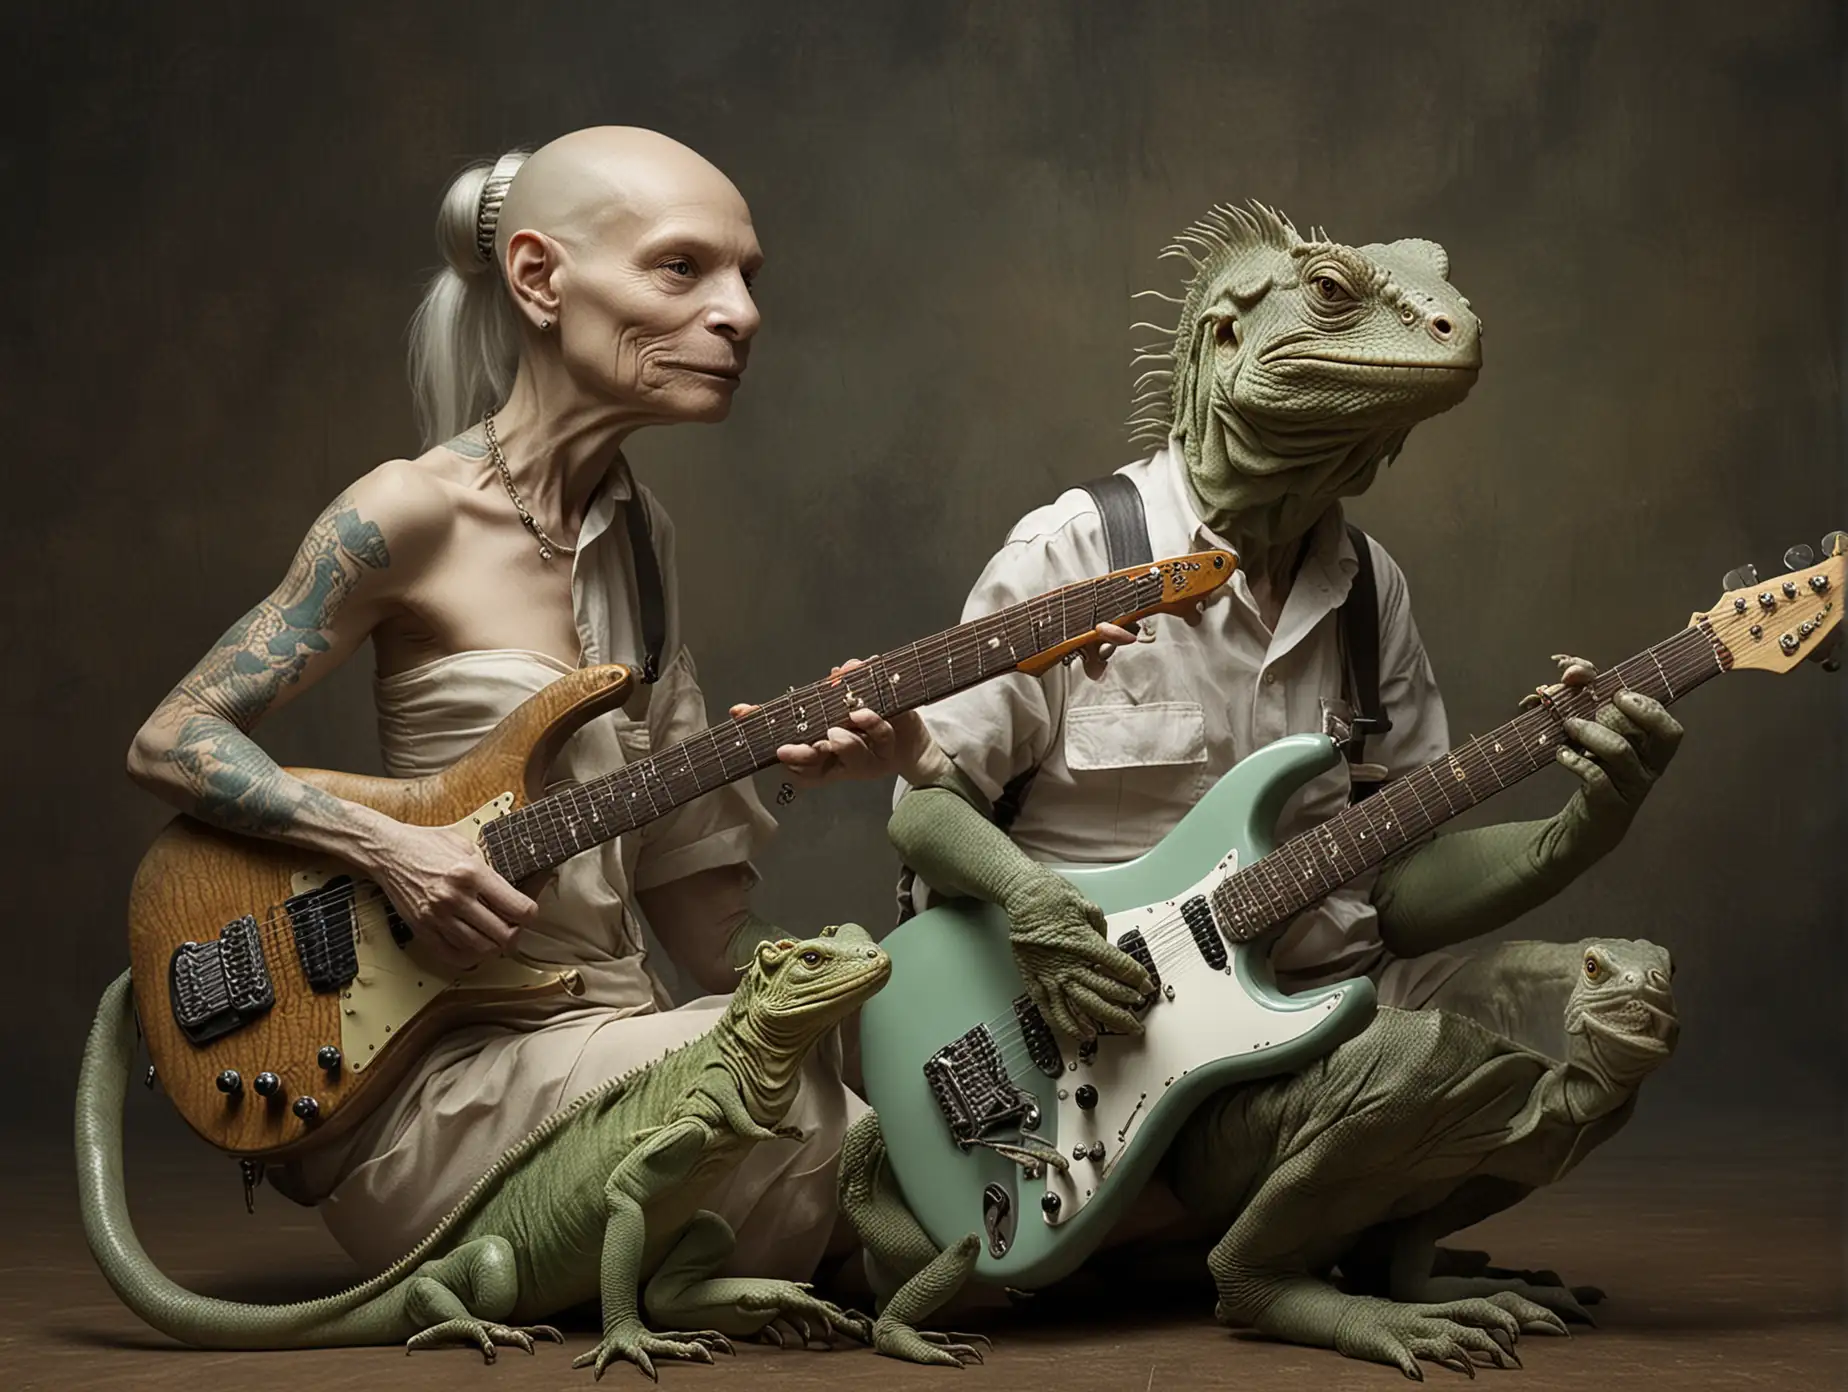 extraterrestrial planets electric guitar old man and young bald woman friends iguanas
